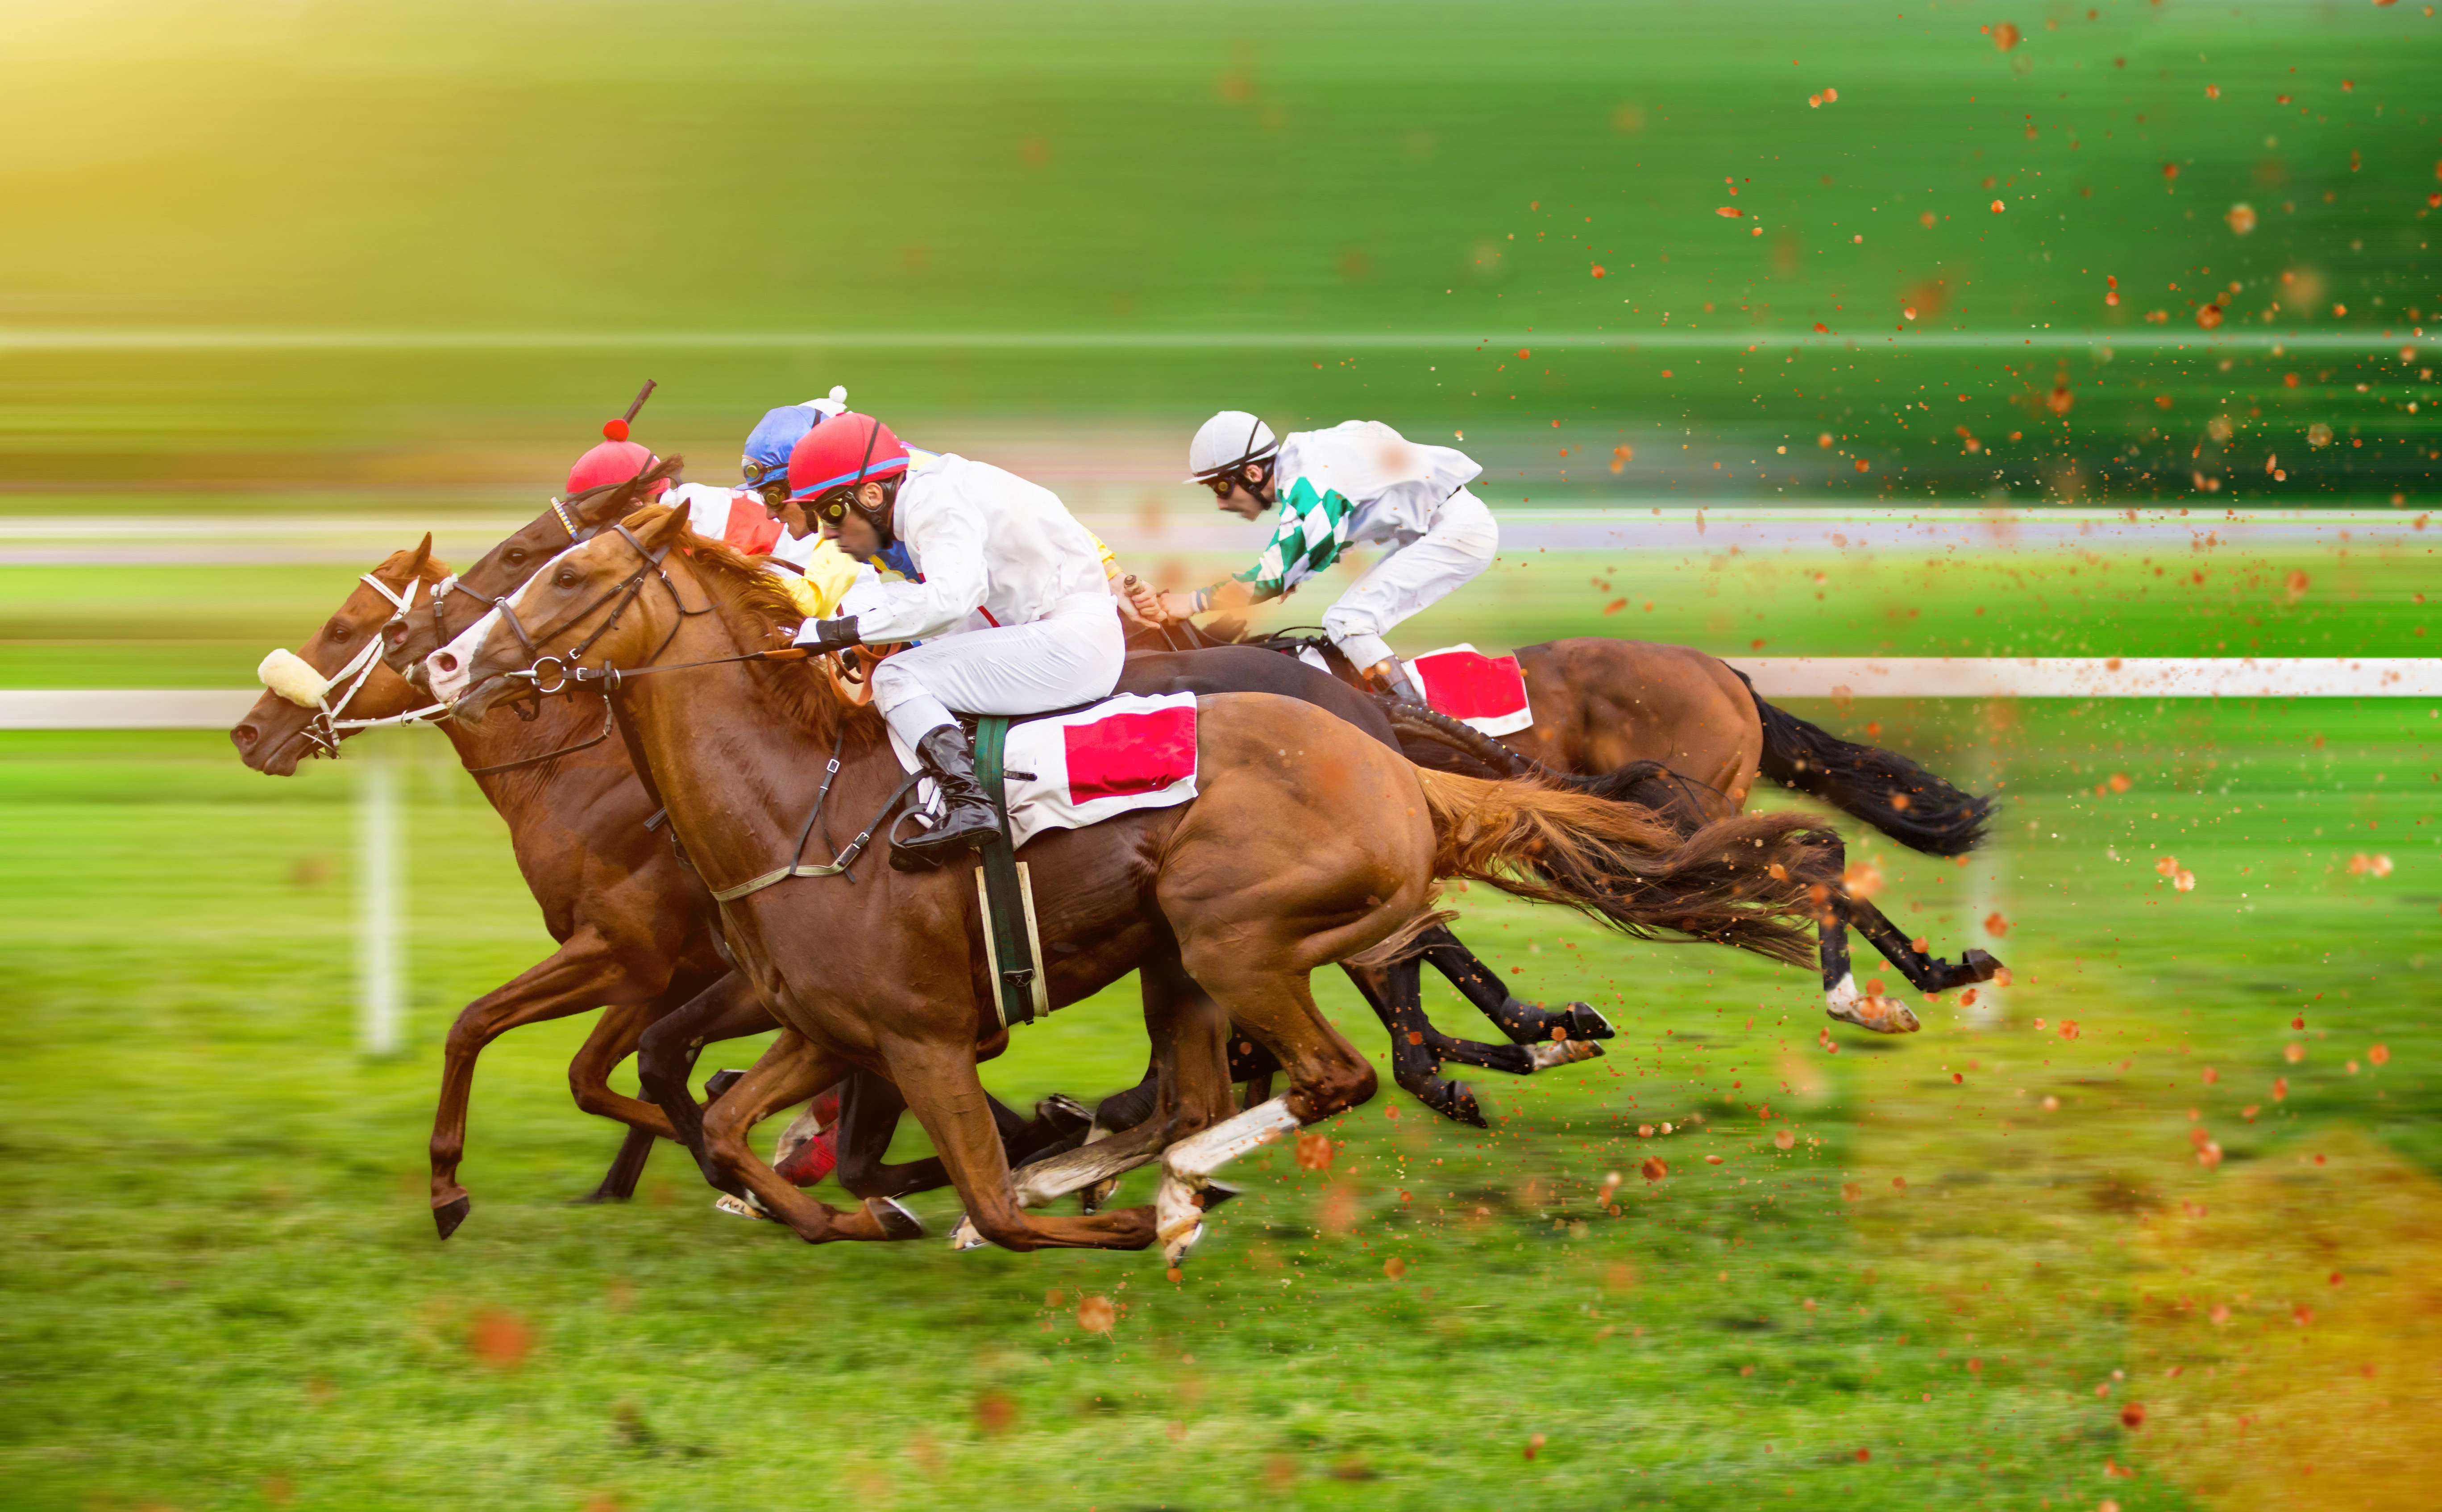 A group of horses racing on turf